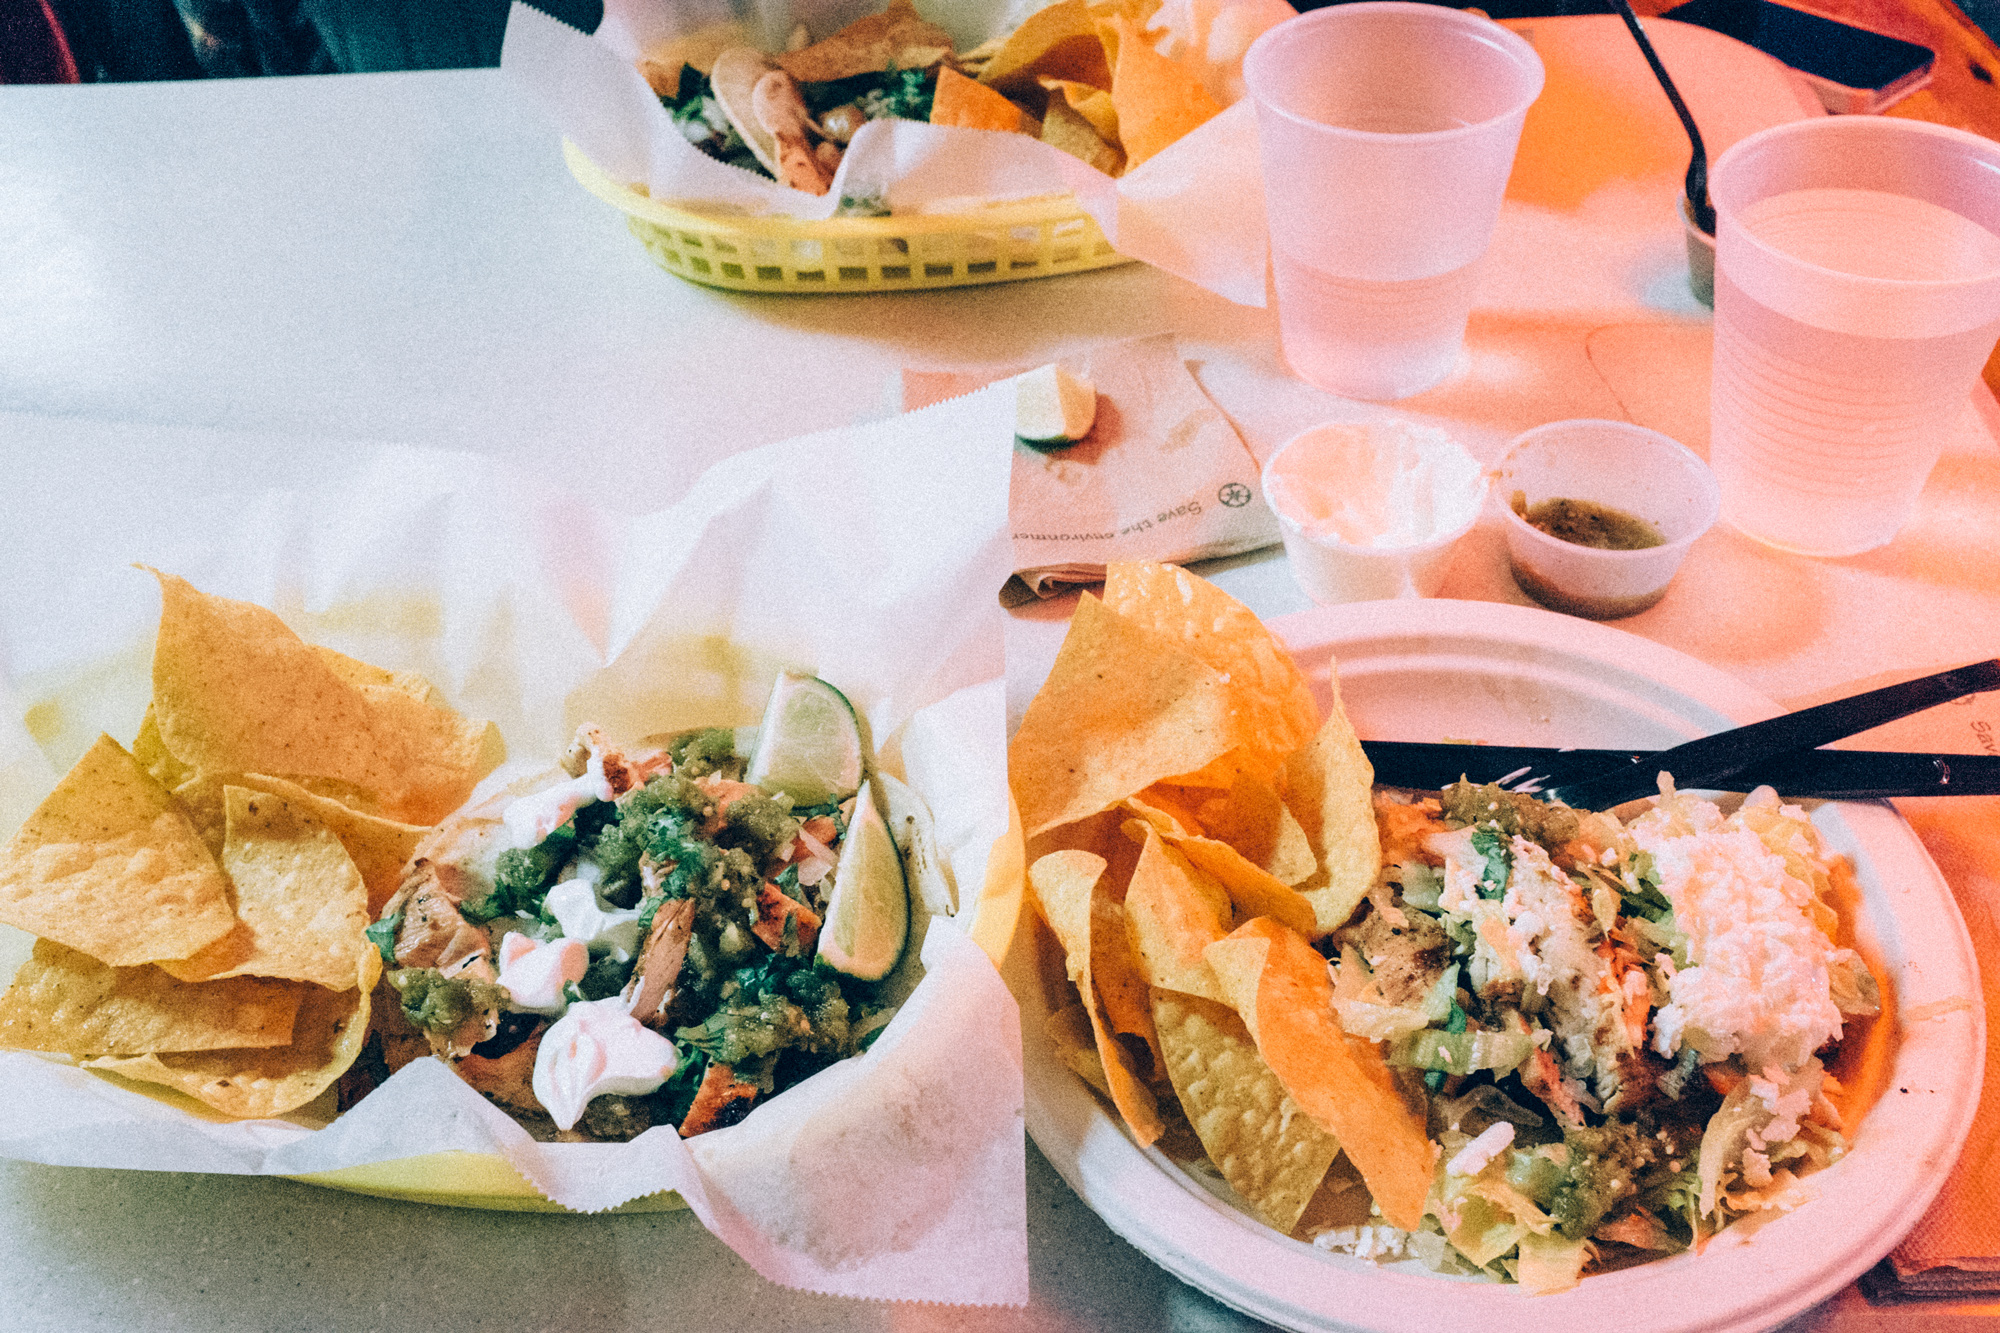 Always ending long walks with tacos. Taco Trio is the best.